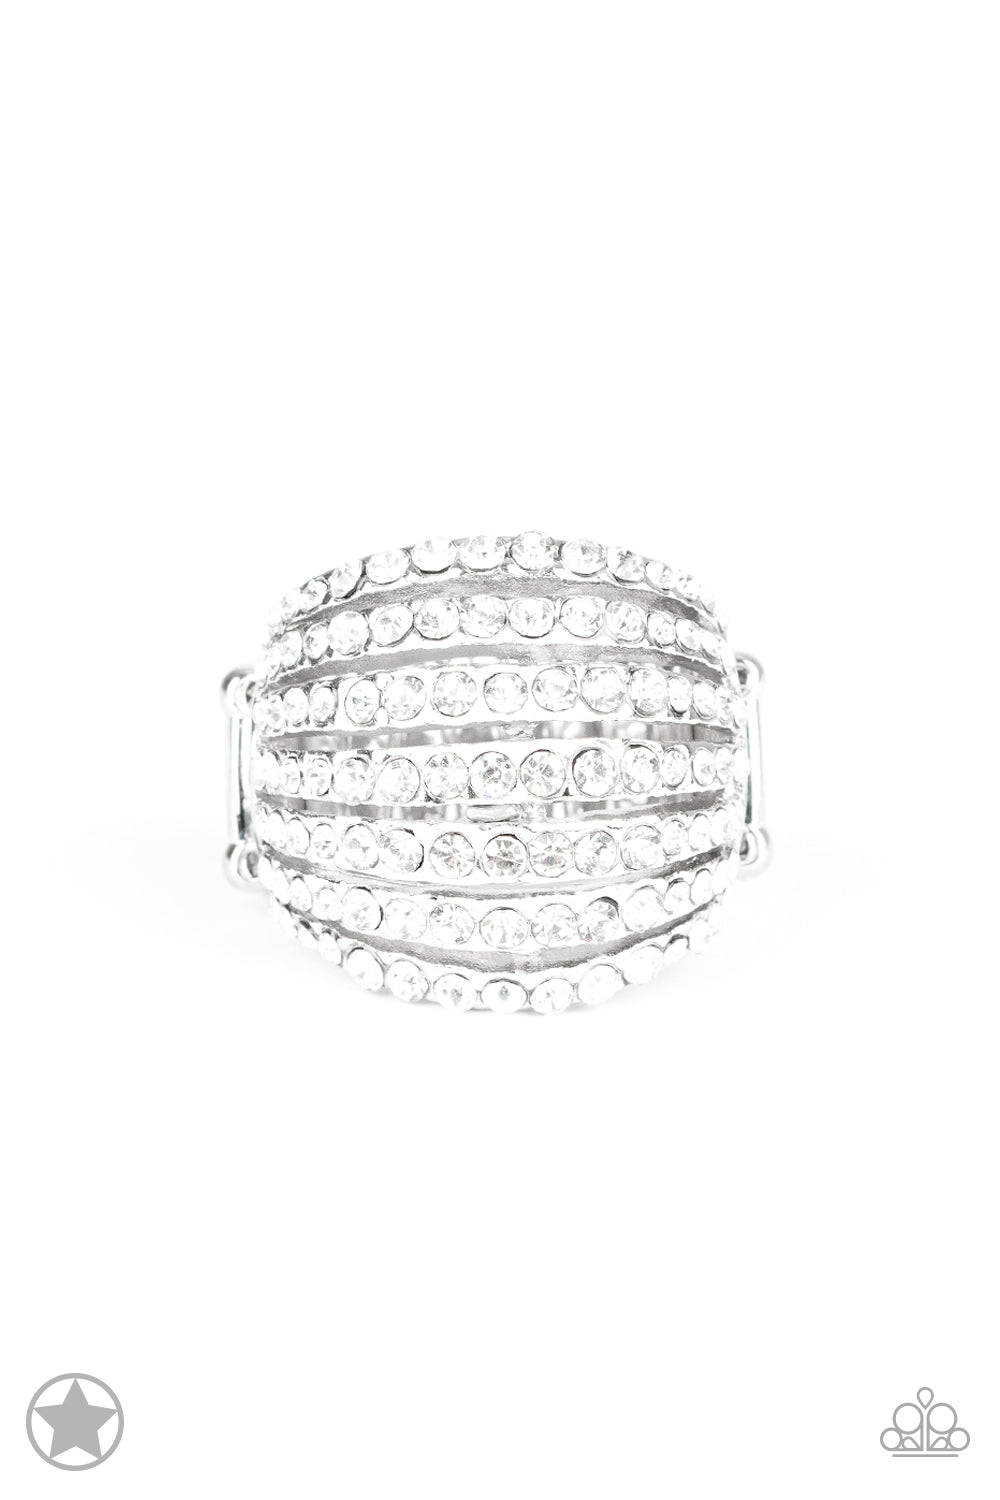 Paparazzi Accessories Blinding Brilliance - White Rings row after row of incandescent white rhinestones stack into a dazzling display. The gorgeous rounded bands and undeniable sparkle create a regal statement piece. Features a stretchy band for a flexible fit.